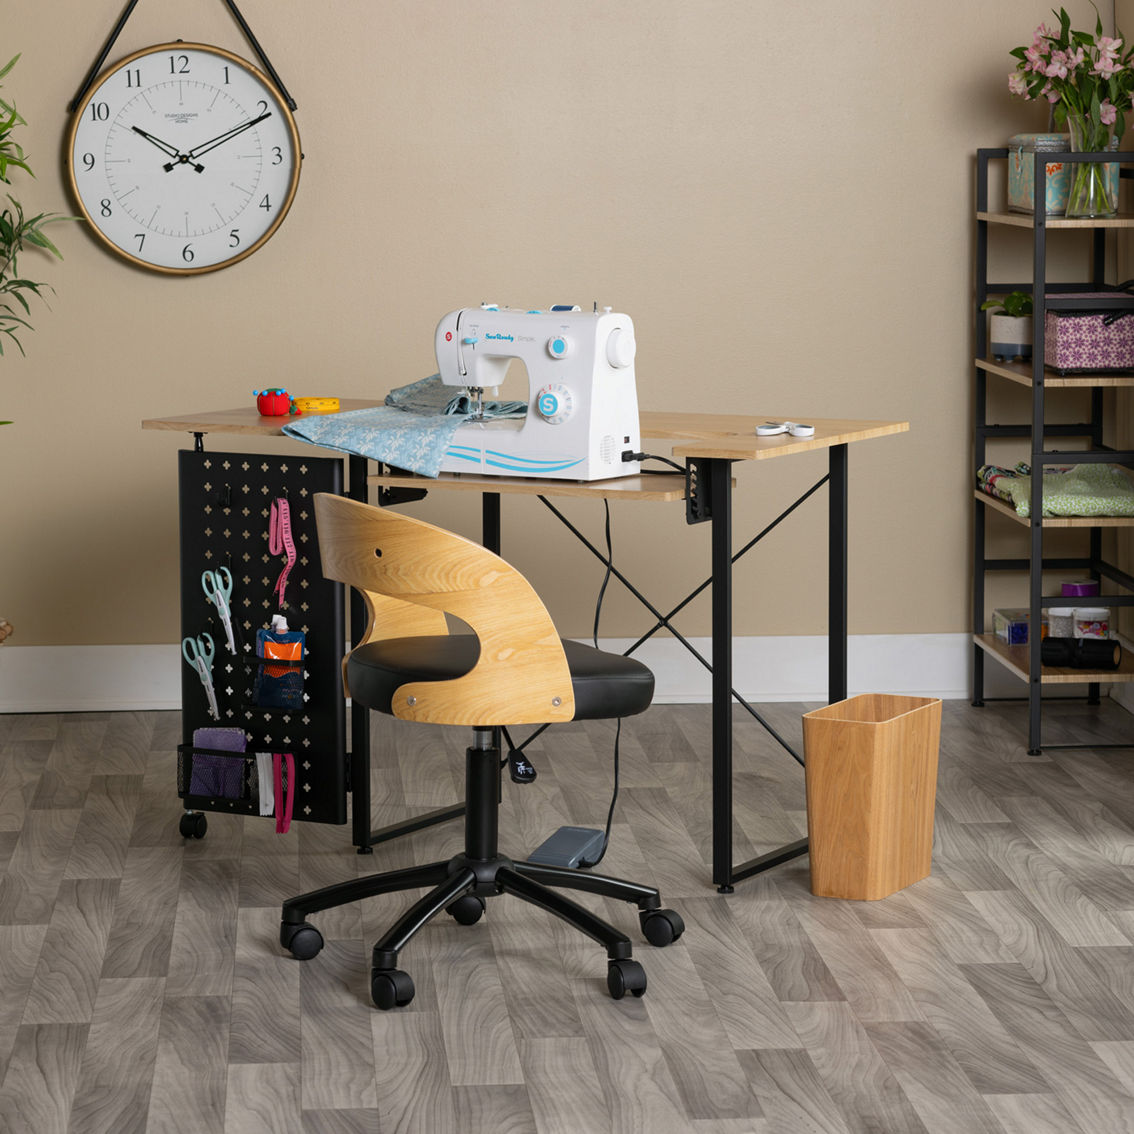 Studio Designs Pivot Sewing Table with Swingout Storage Panel - Image 9 of 10